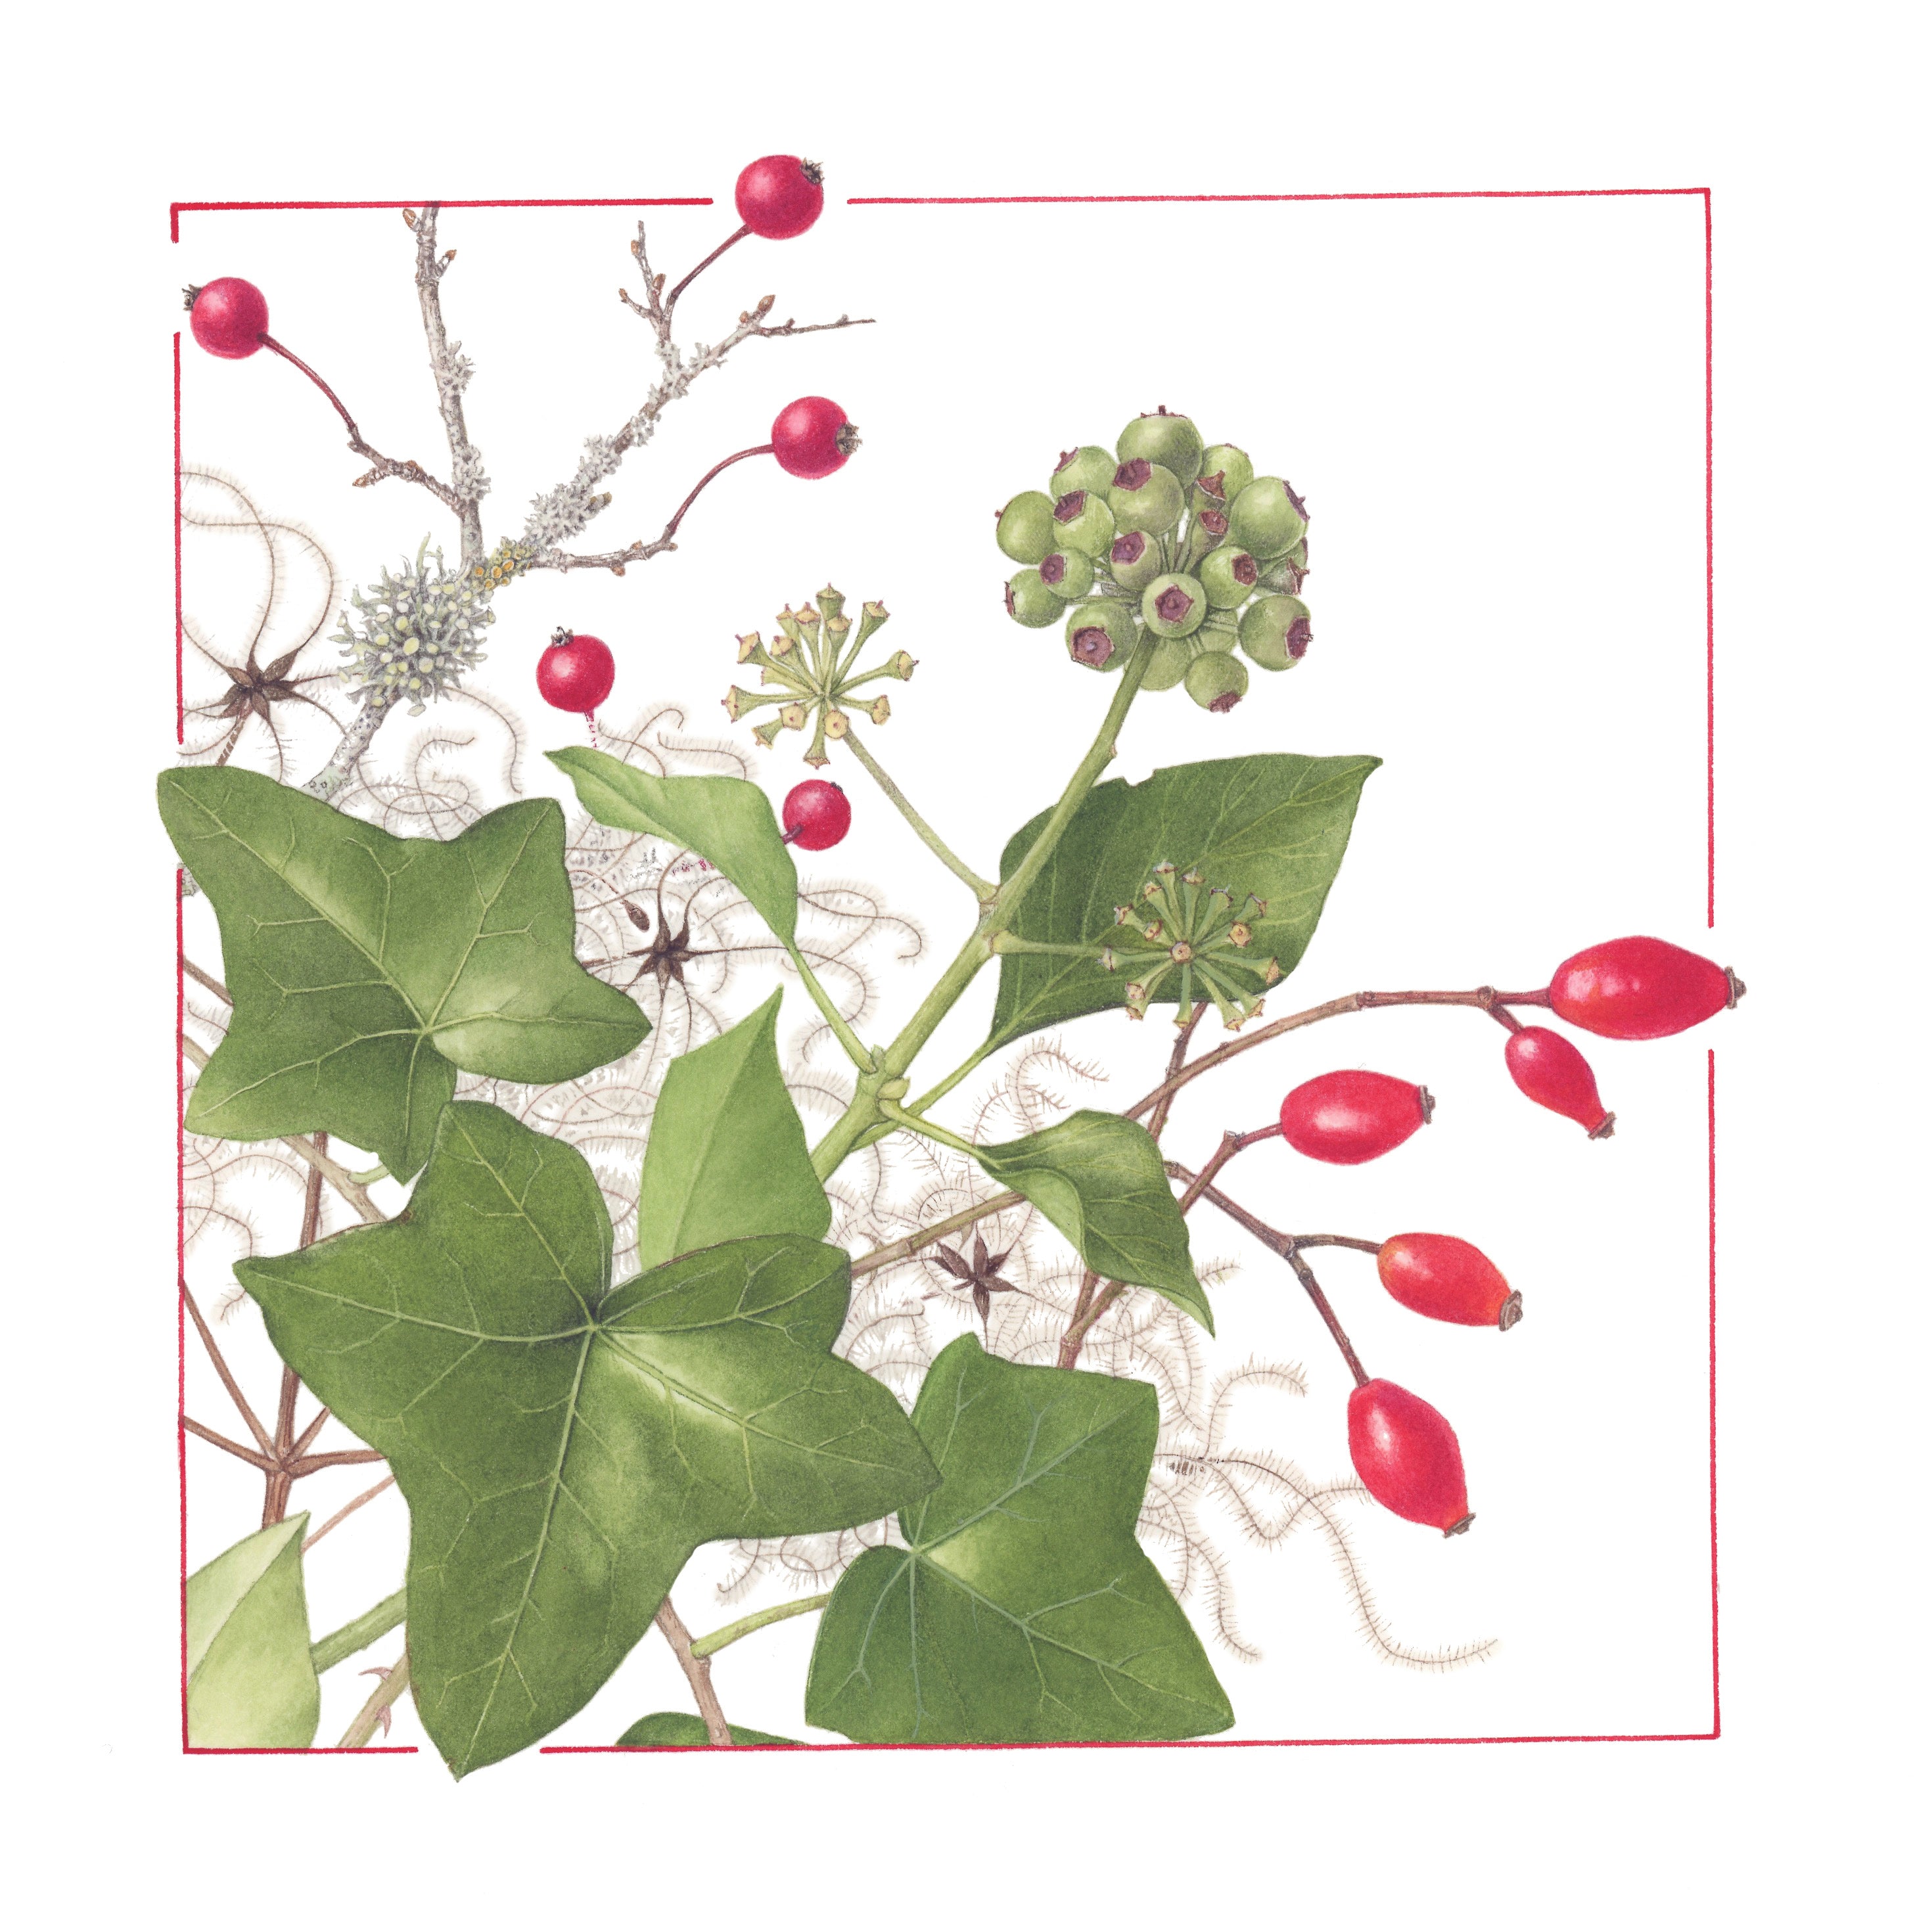 Christmas Cards: Winter Hedgerow & Winter Tree twin pack